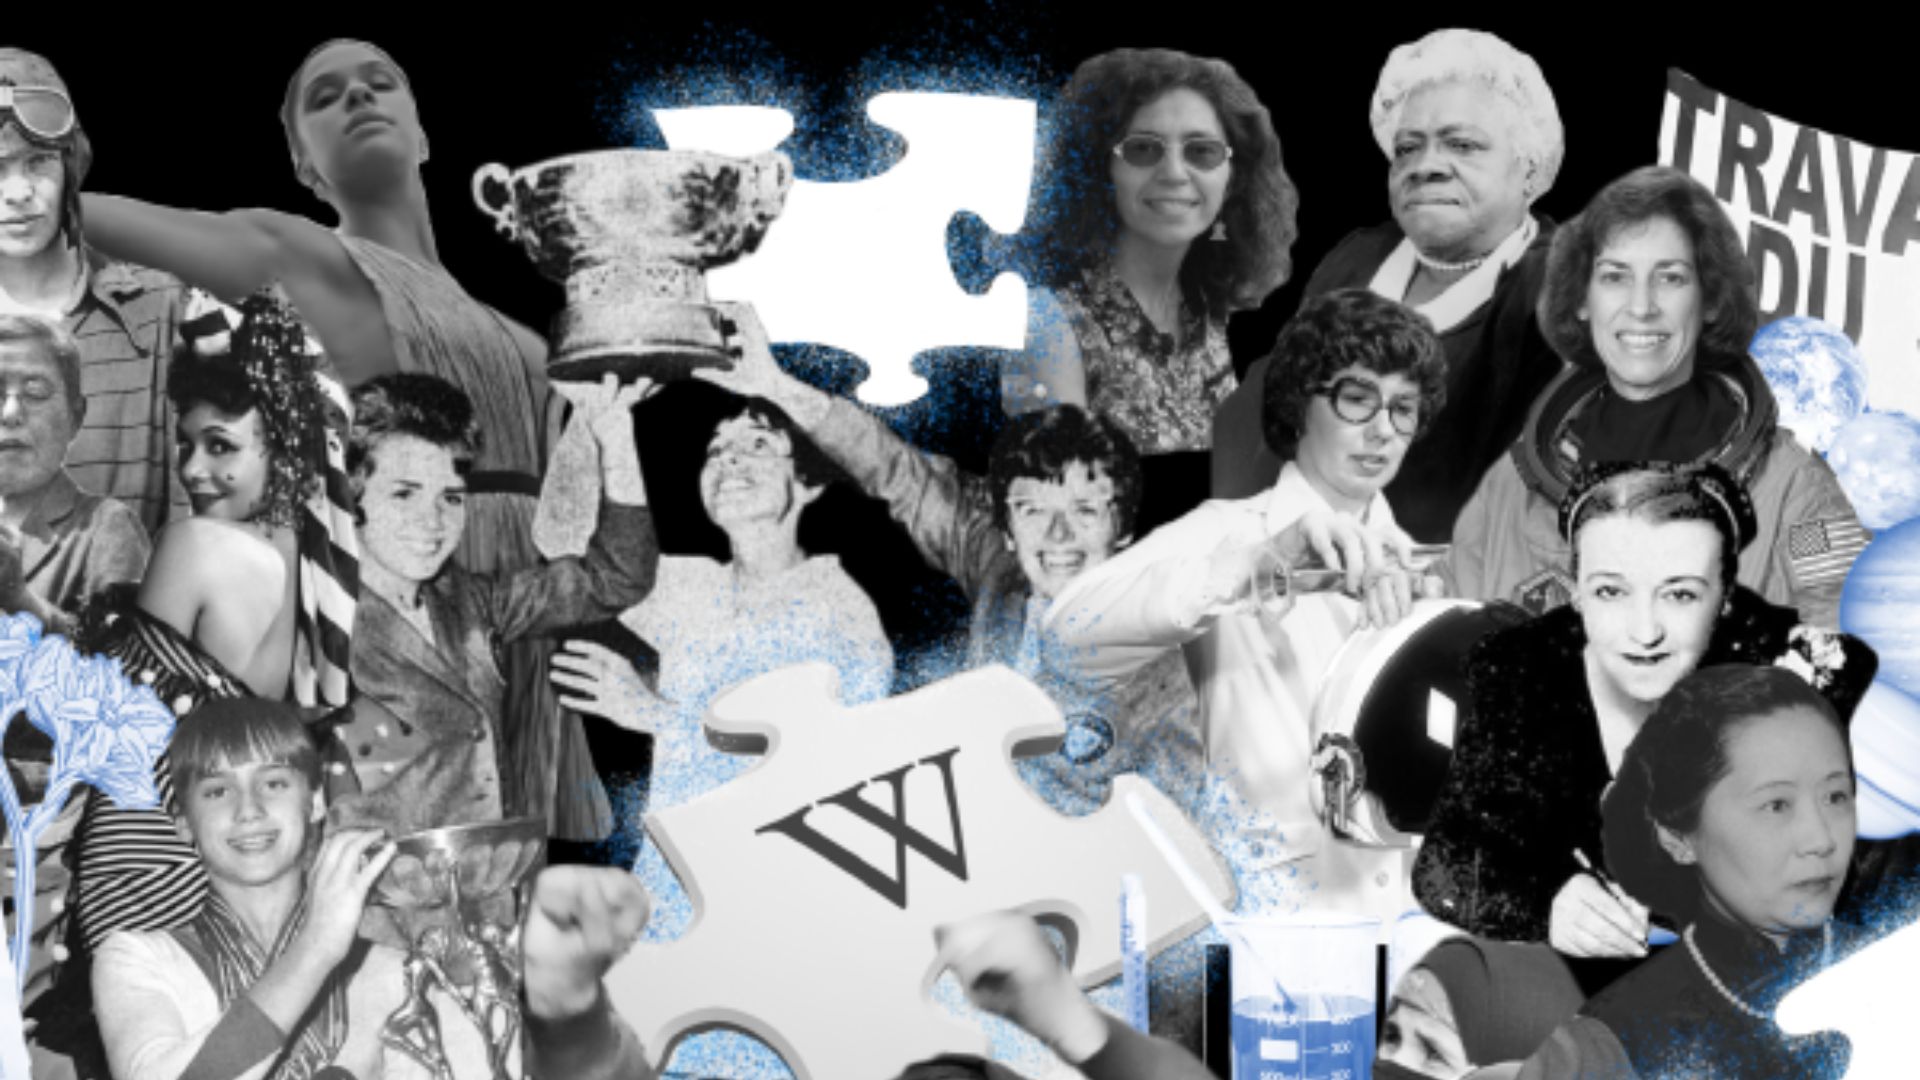 Wikimedia Foundation launches “Wikipedia Needs More Women” campaign on Intl Women’s Day